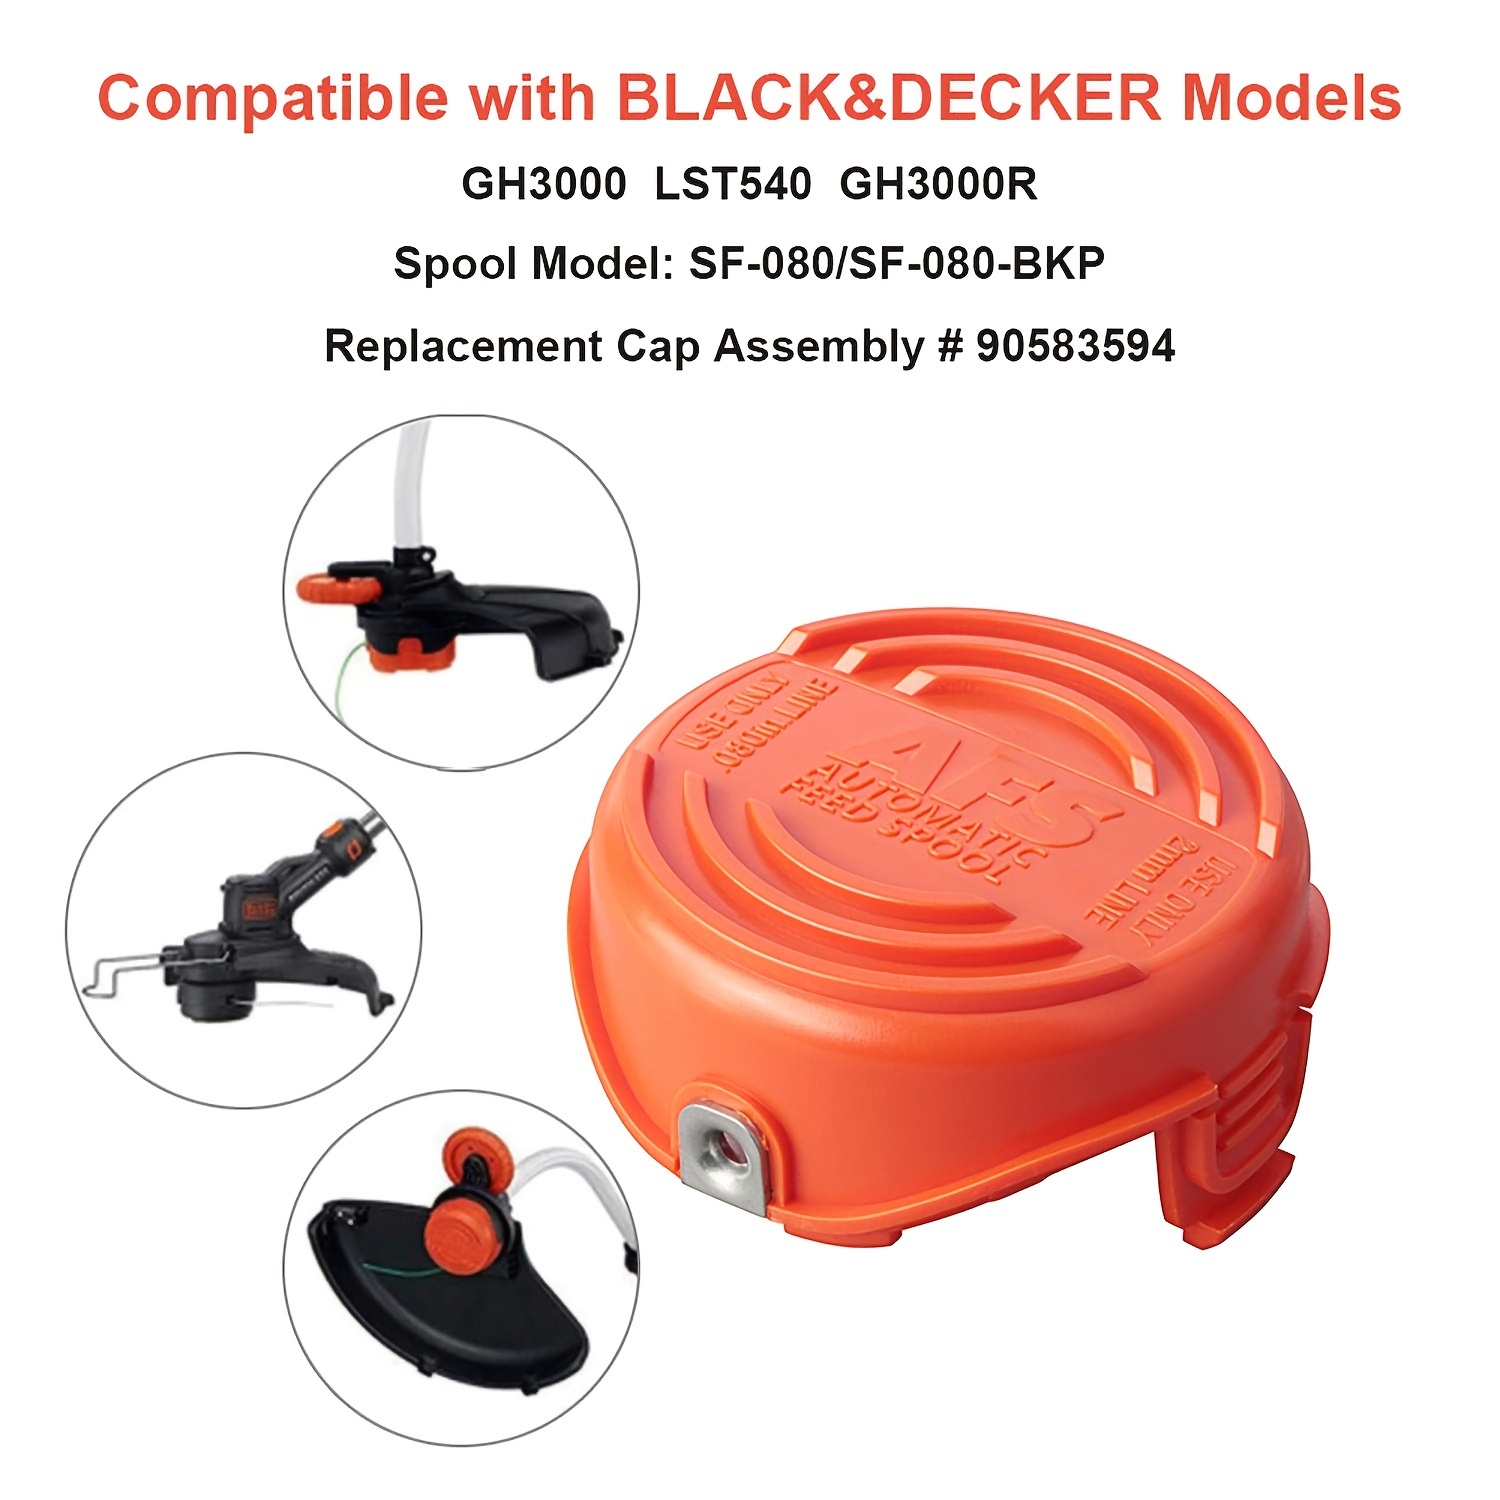 Black & Decker OEM String Trimmer Replacement Cap Assembly for